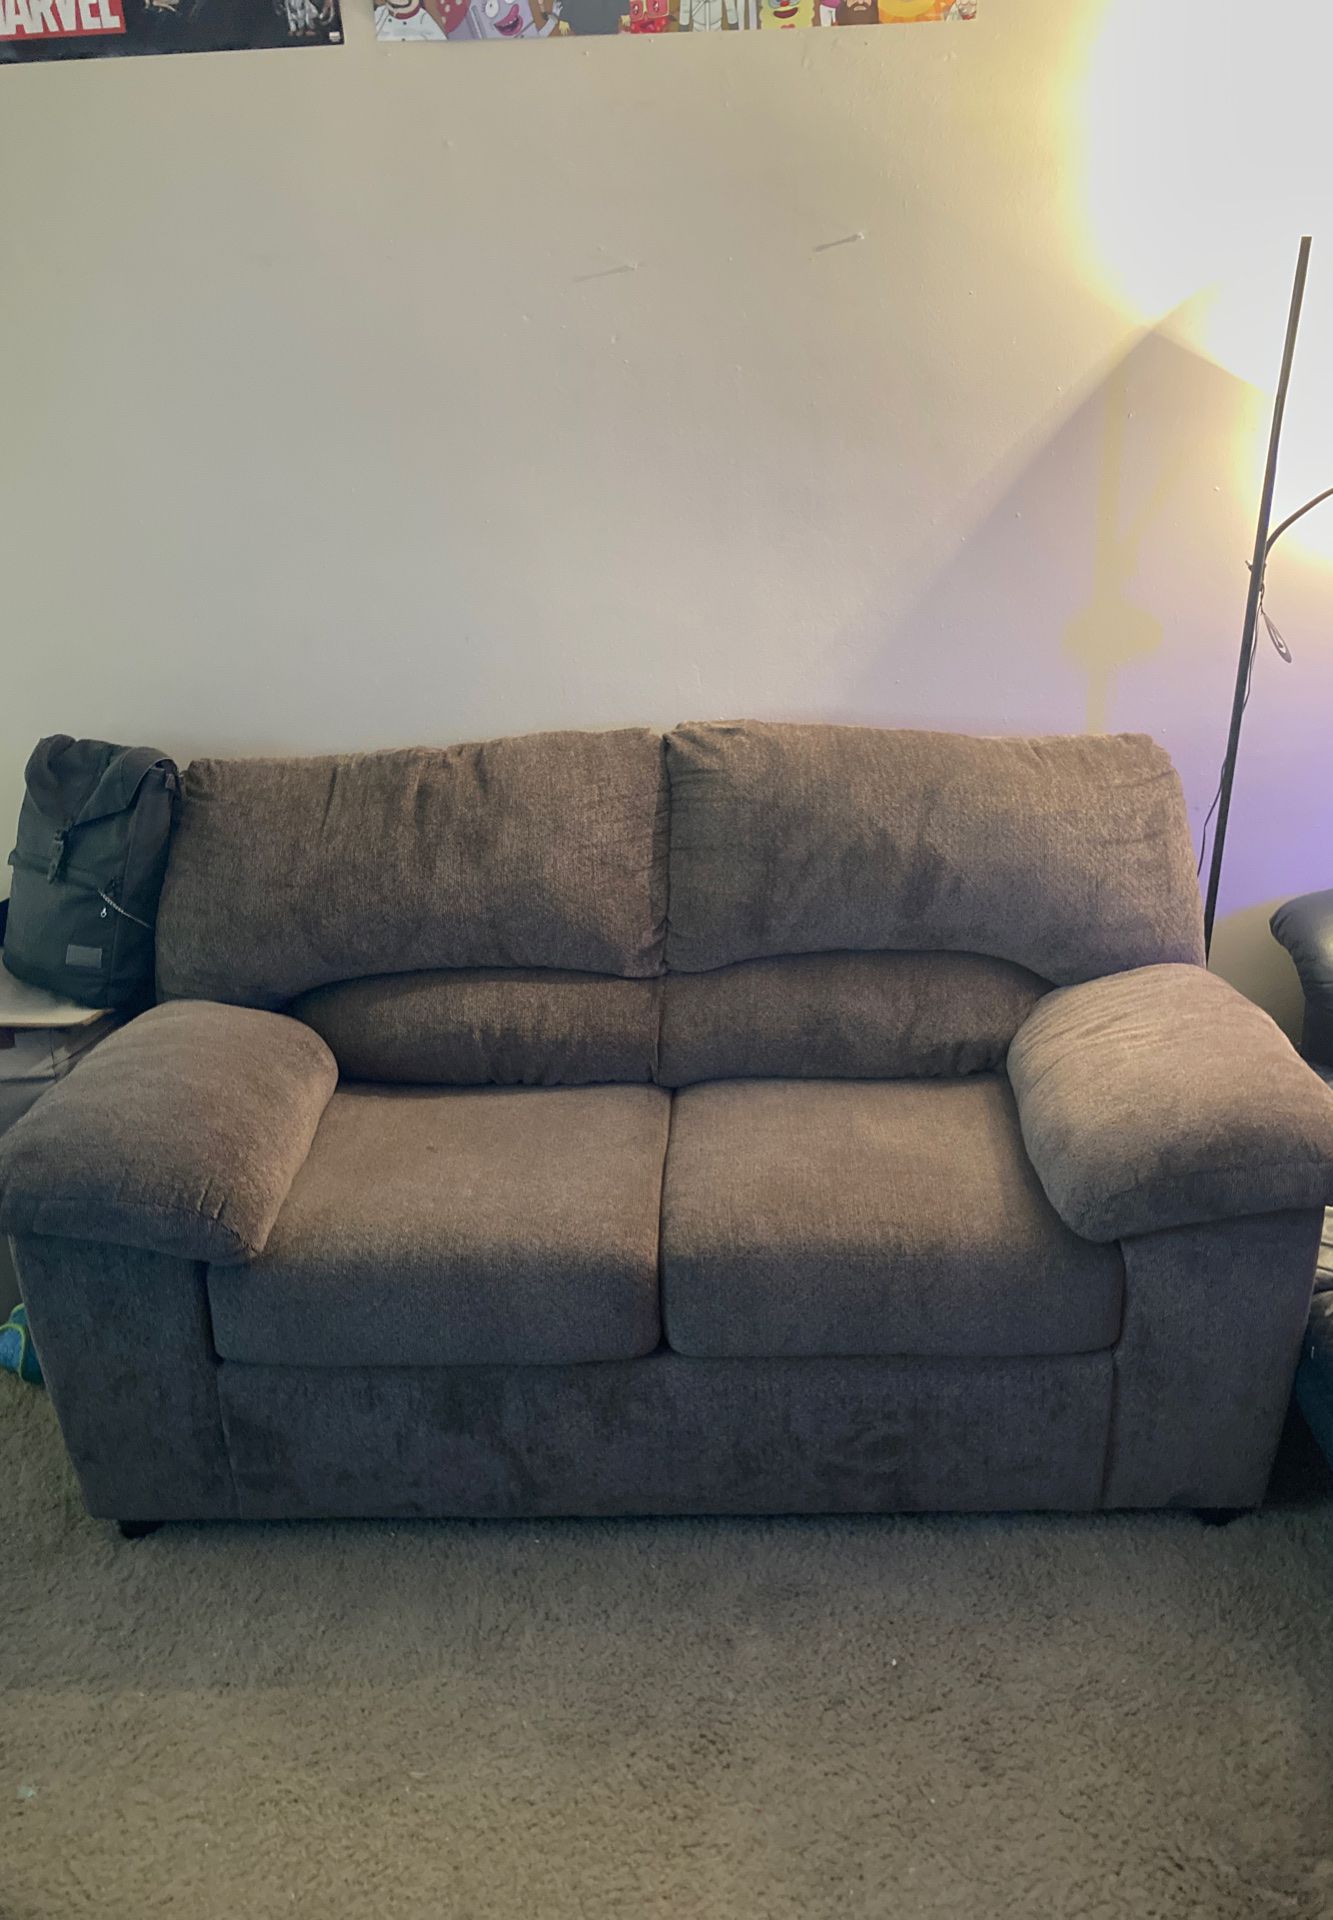 Small brown couch